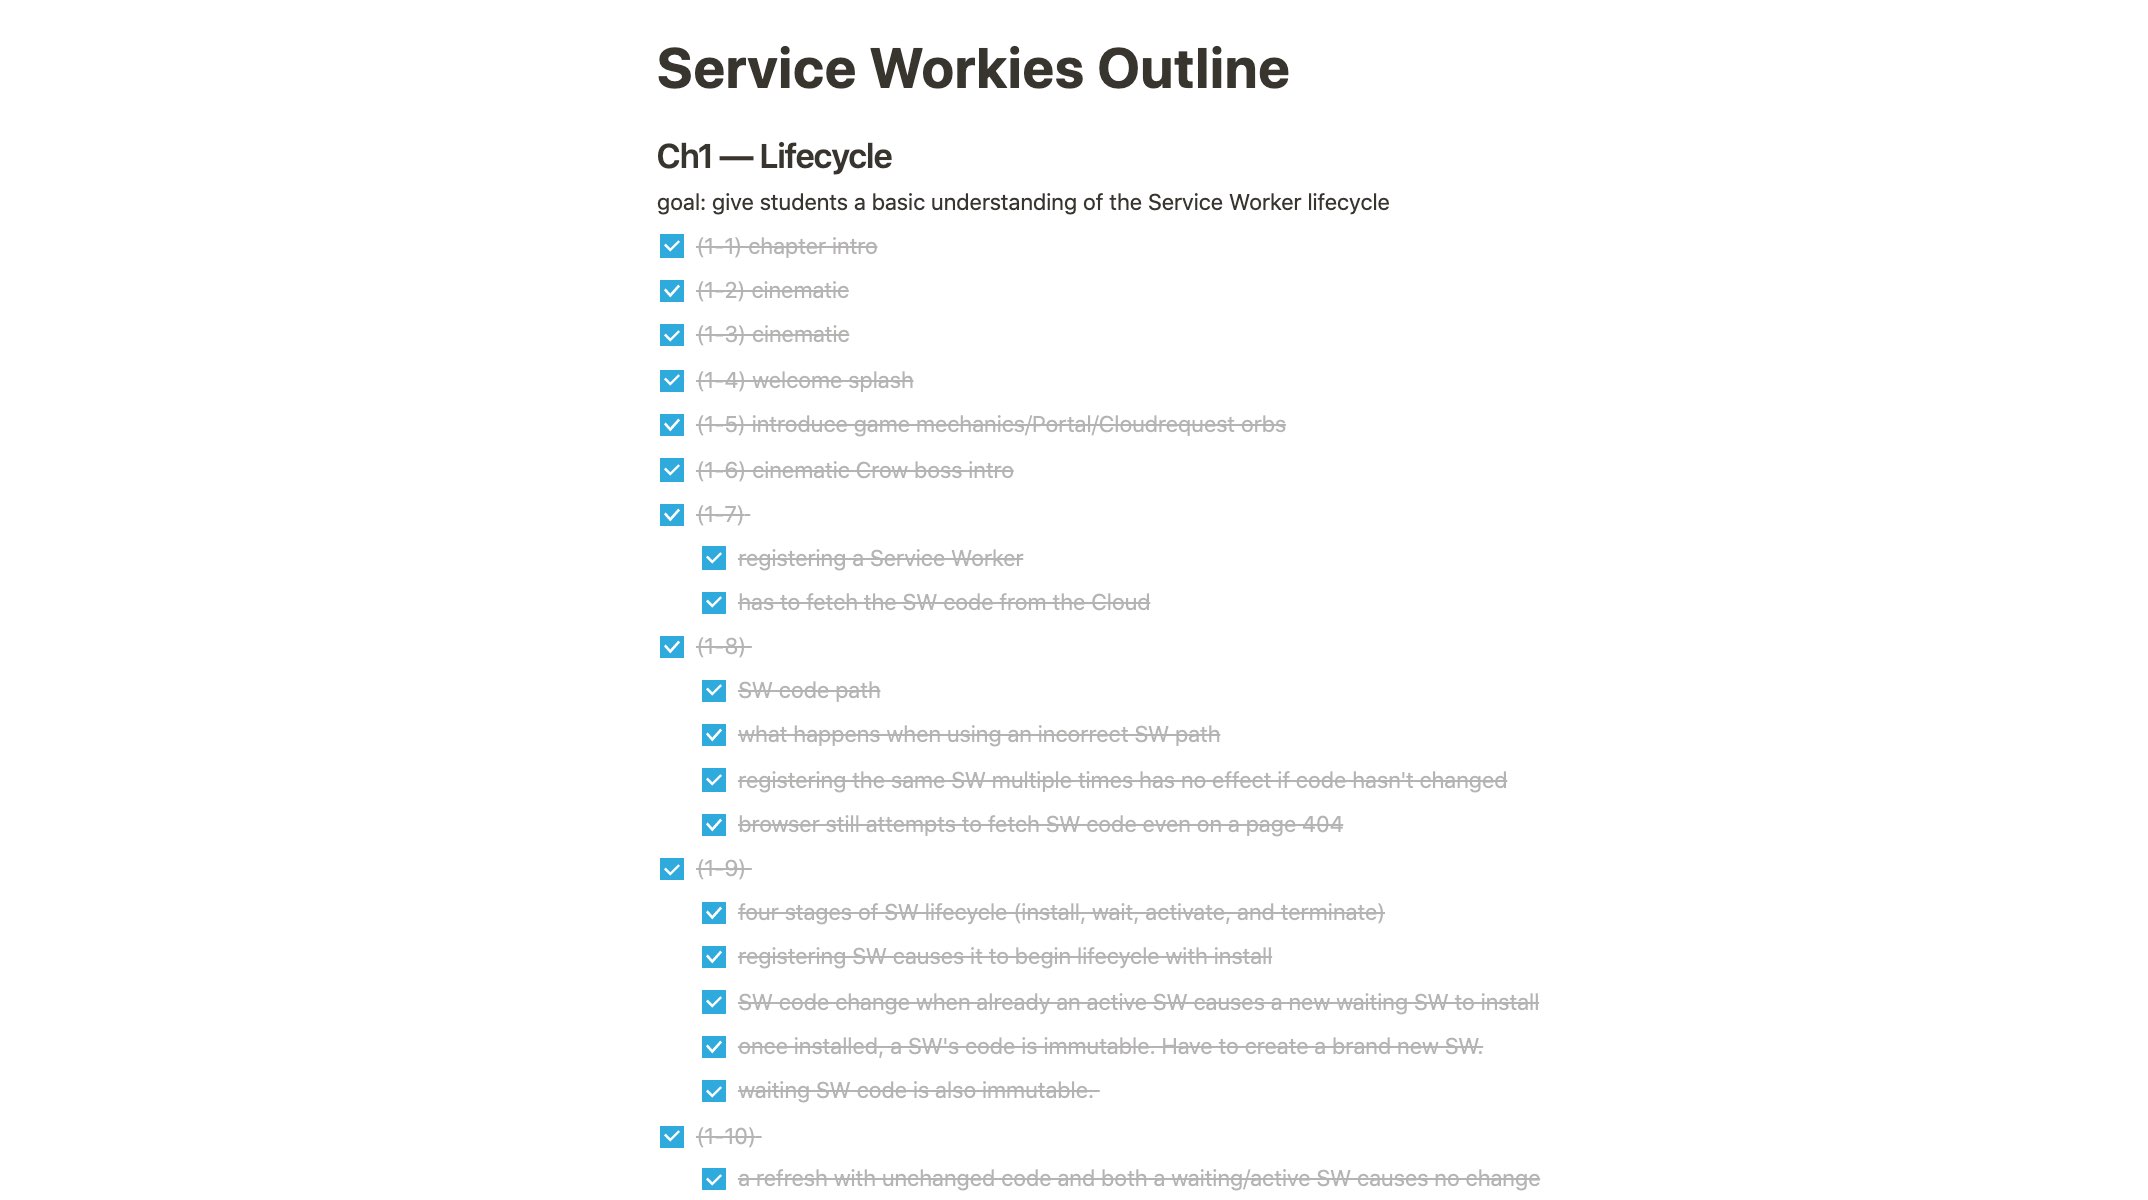 Service Workies Outline